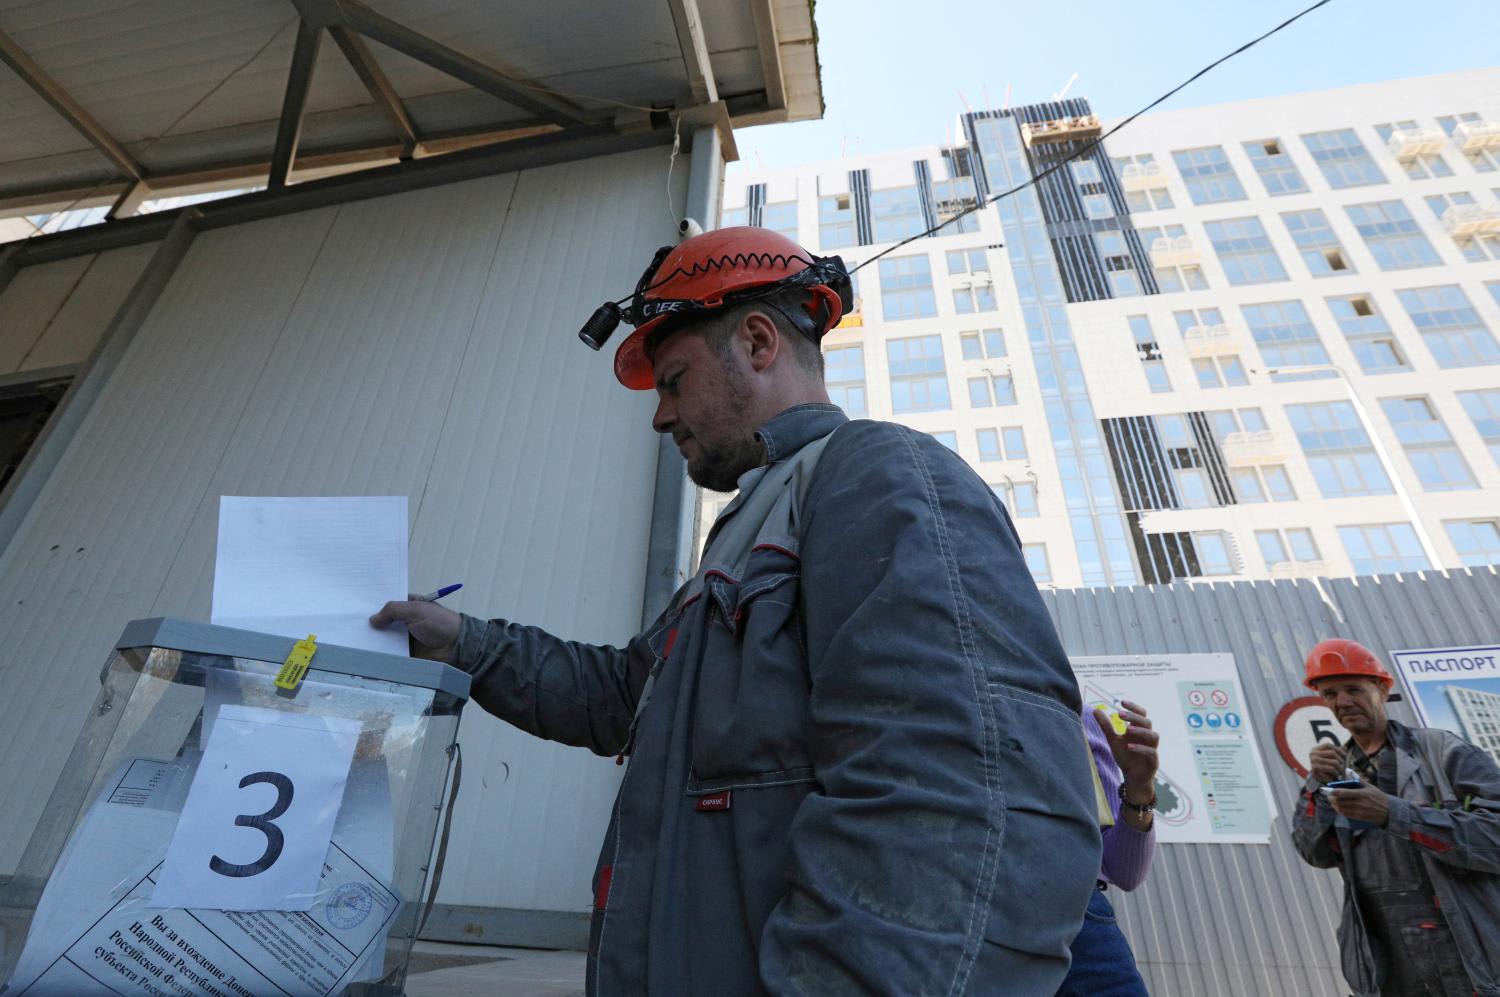 A construction worker casts his ballot during a referendum on the joining of the self-proclaimed Donetsk People's Republic (DPR) to Russia, in Sevastopol, Crimea Sept 26, 2022.